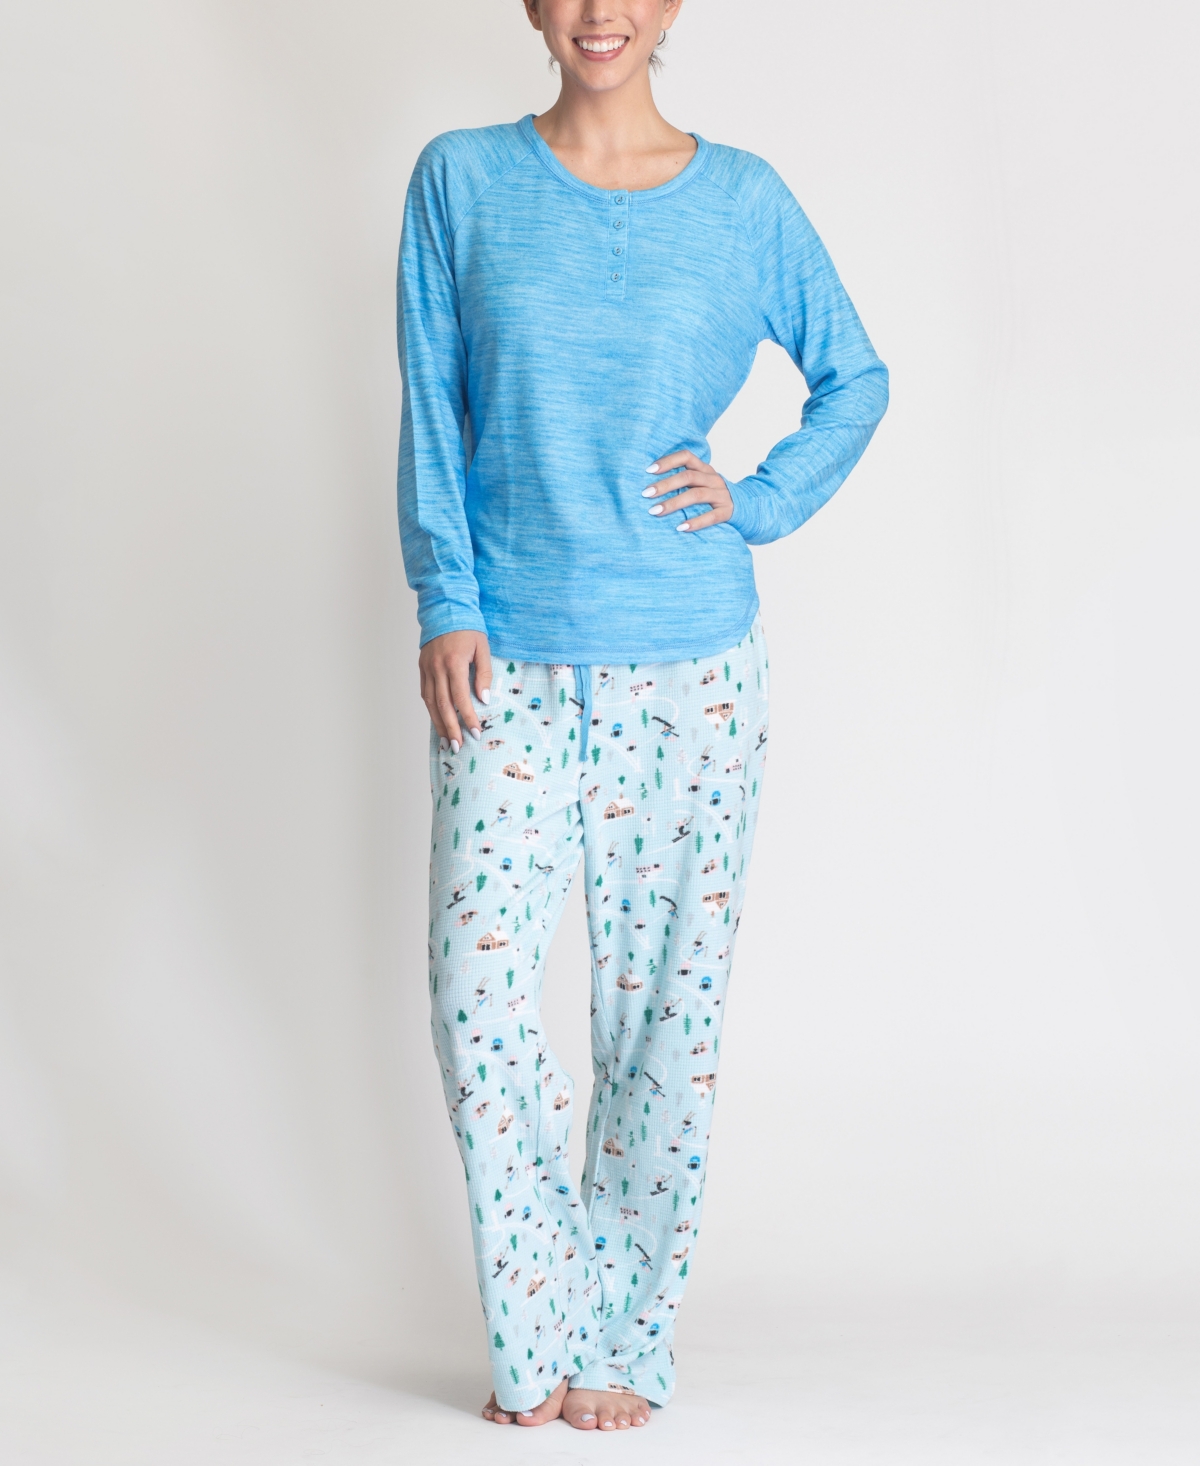 Muk Luks Plus Size Cozy Sleep And Lounge Set, 2 Piece In Blue